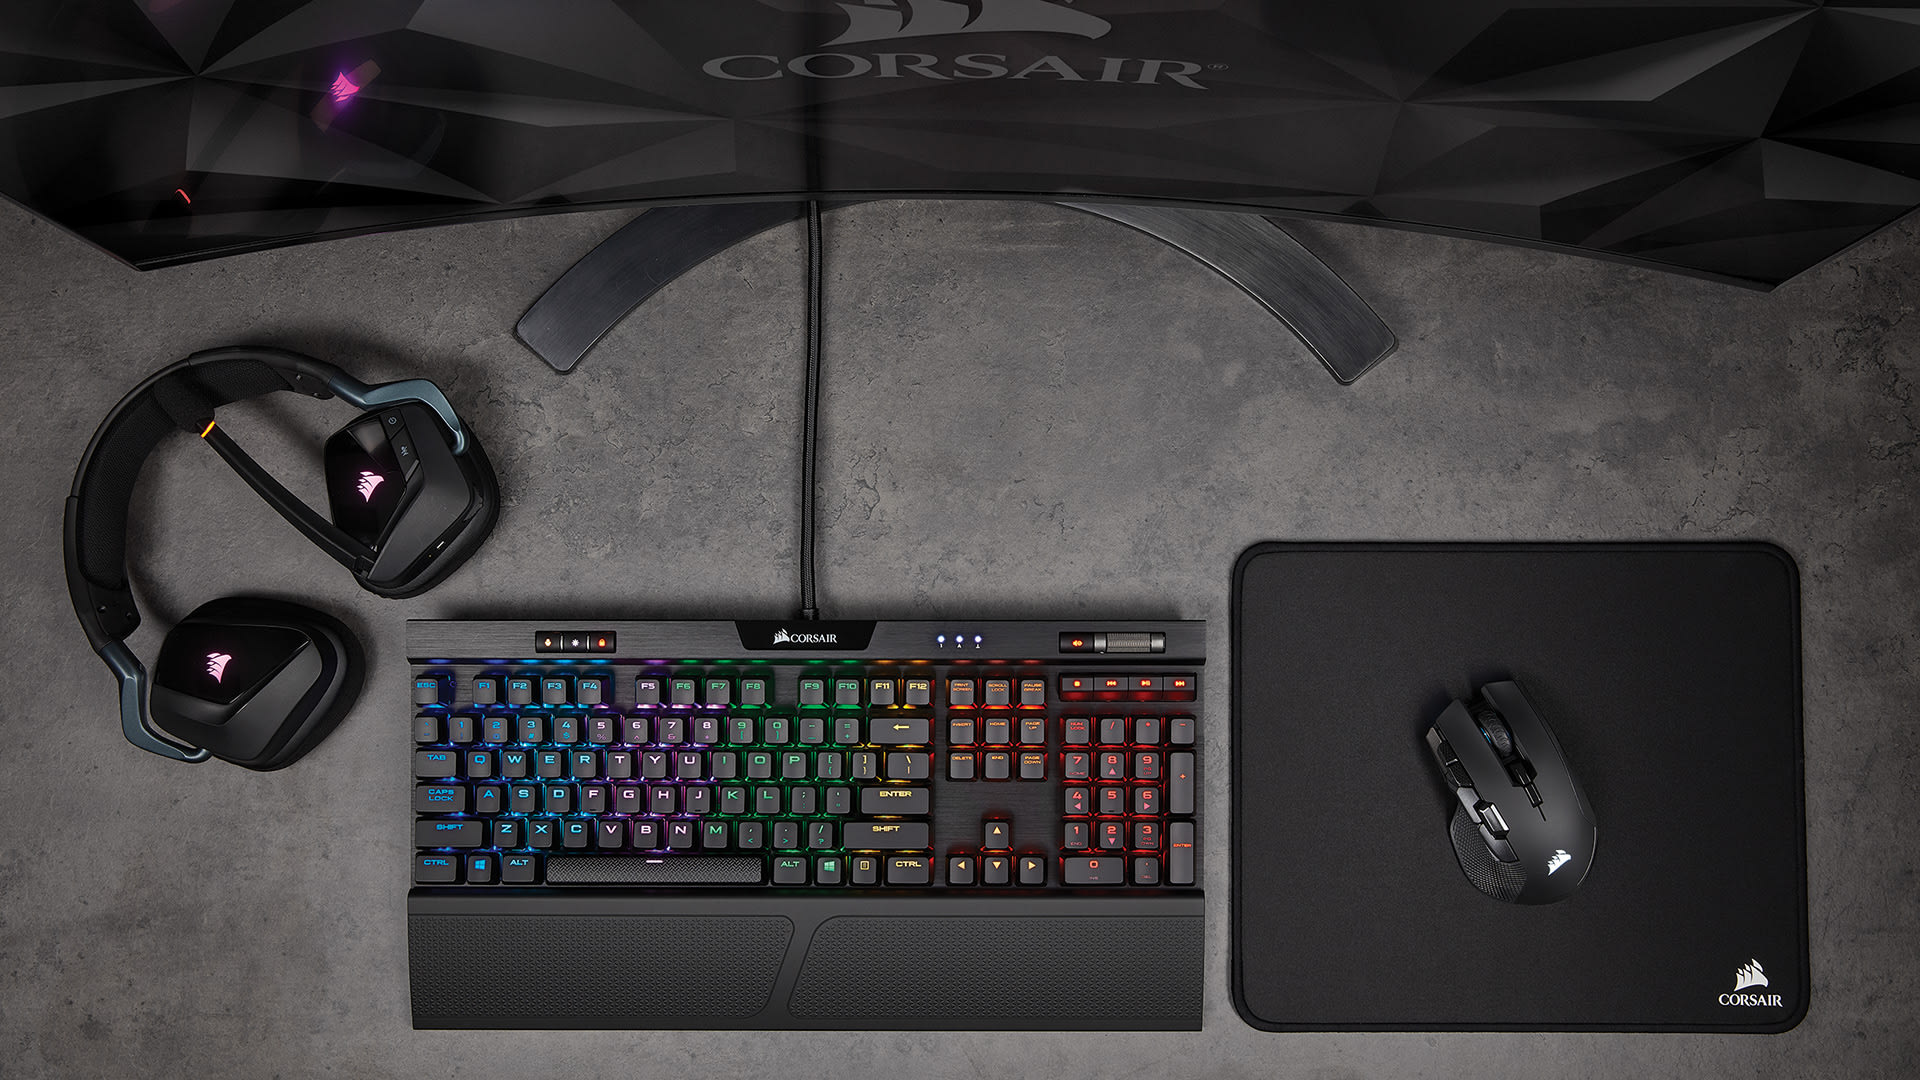 Ironclaw RGB Wireless, le test complet - Page 2 sur 4 - GinjFo